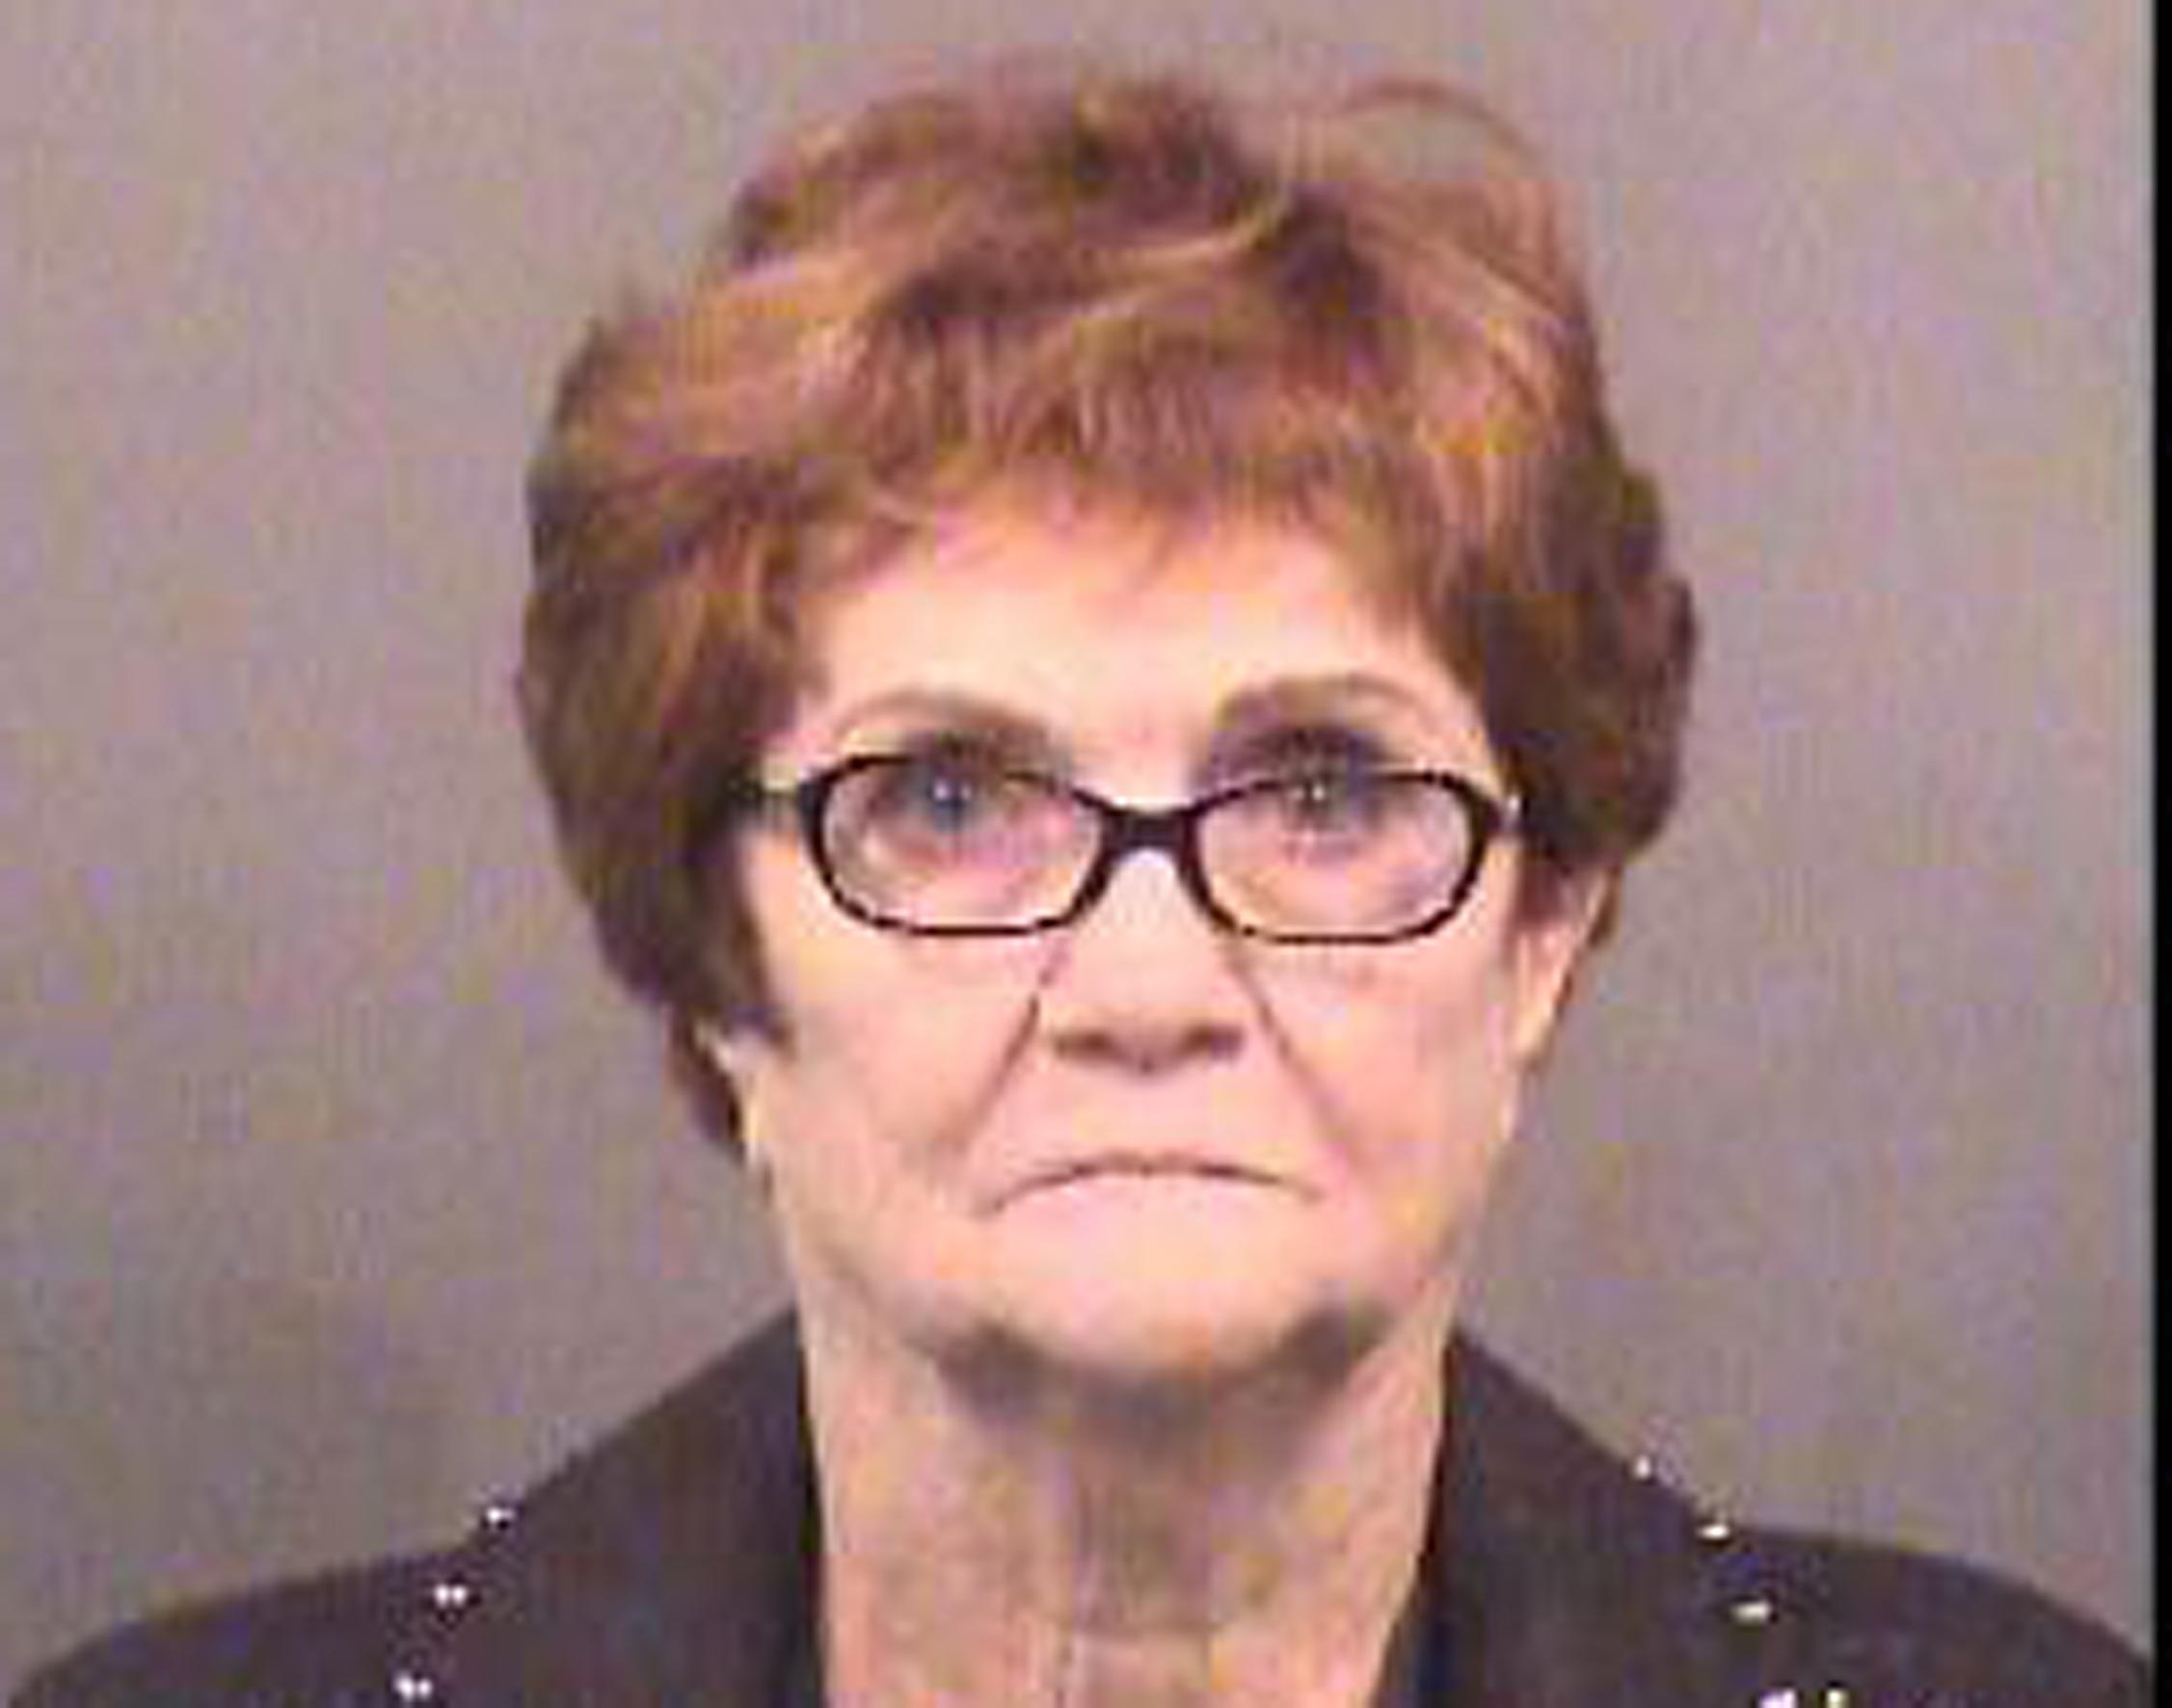 82yearold woman arrested after scuffle at Wichita airport The